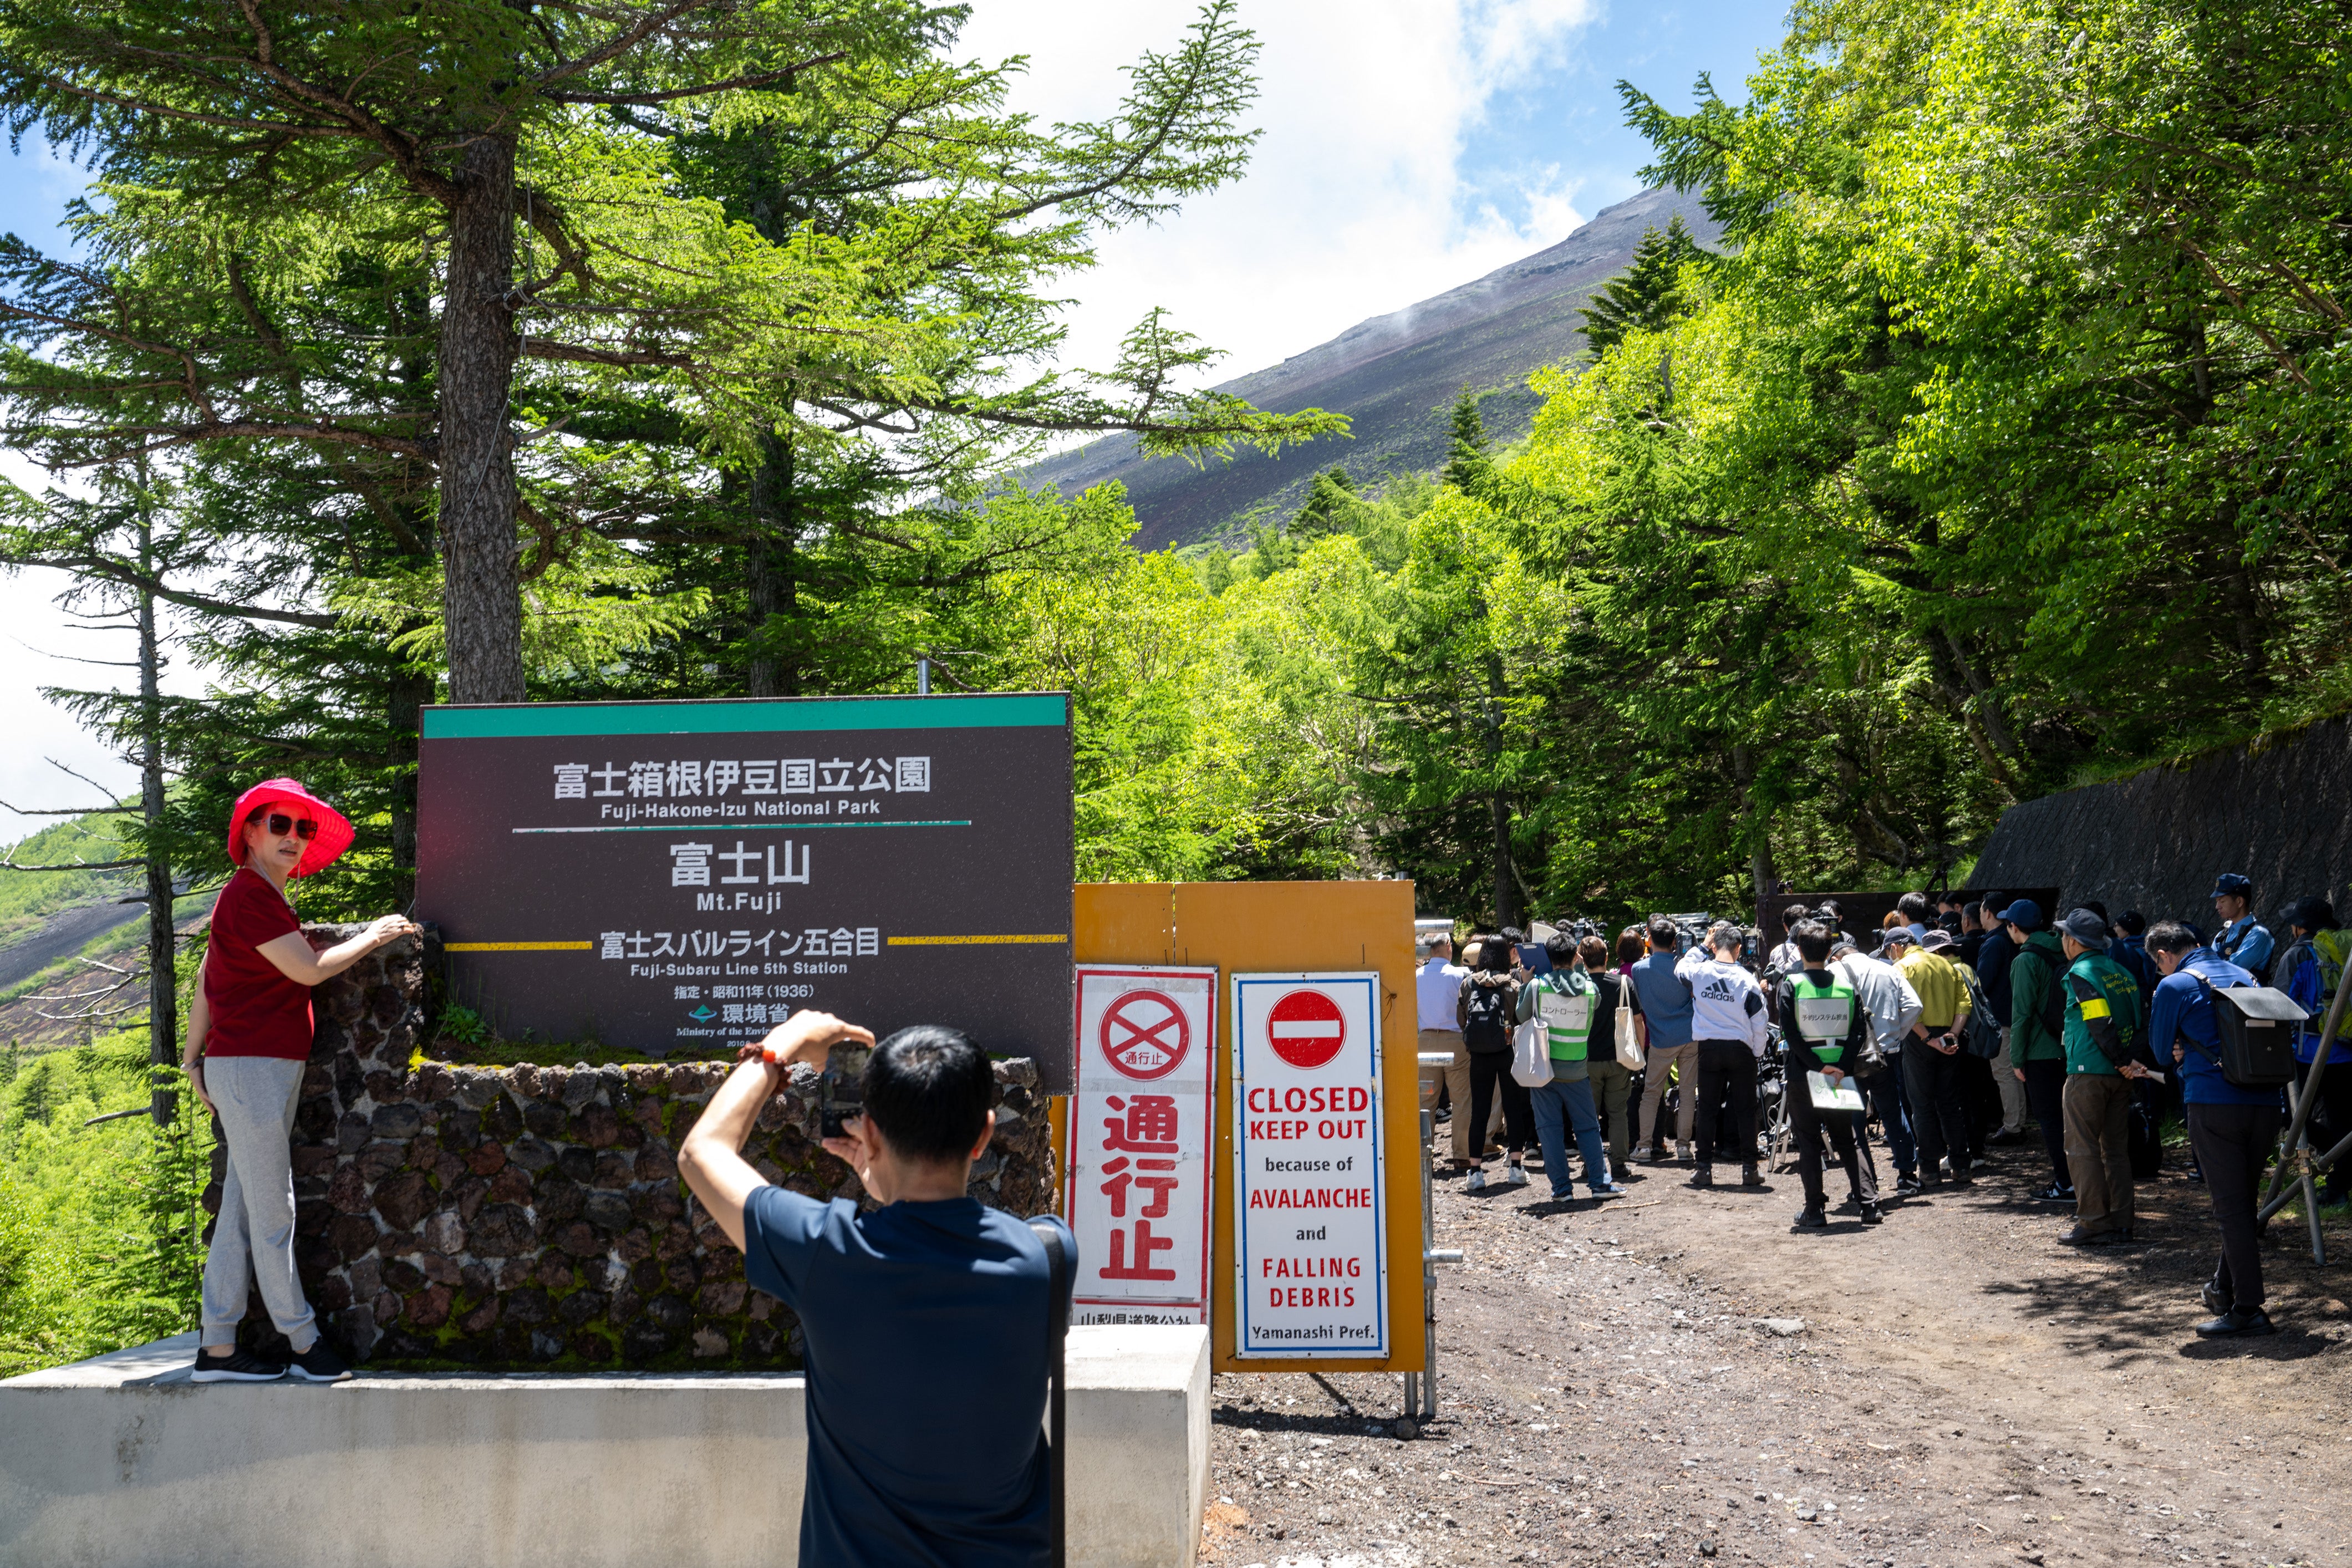 A tourist poses in front of the gate of a national park near the Fuji Subaru Line 5th station, which leads to the Yoshida trail for hikers climbing Mount Fuji